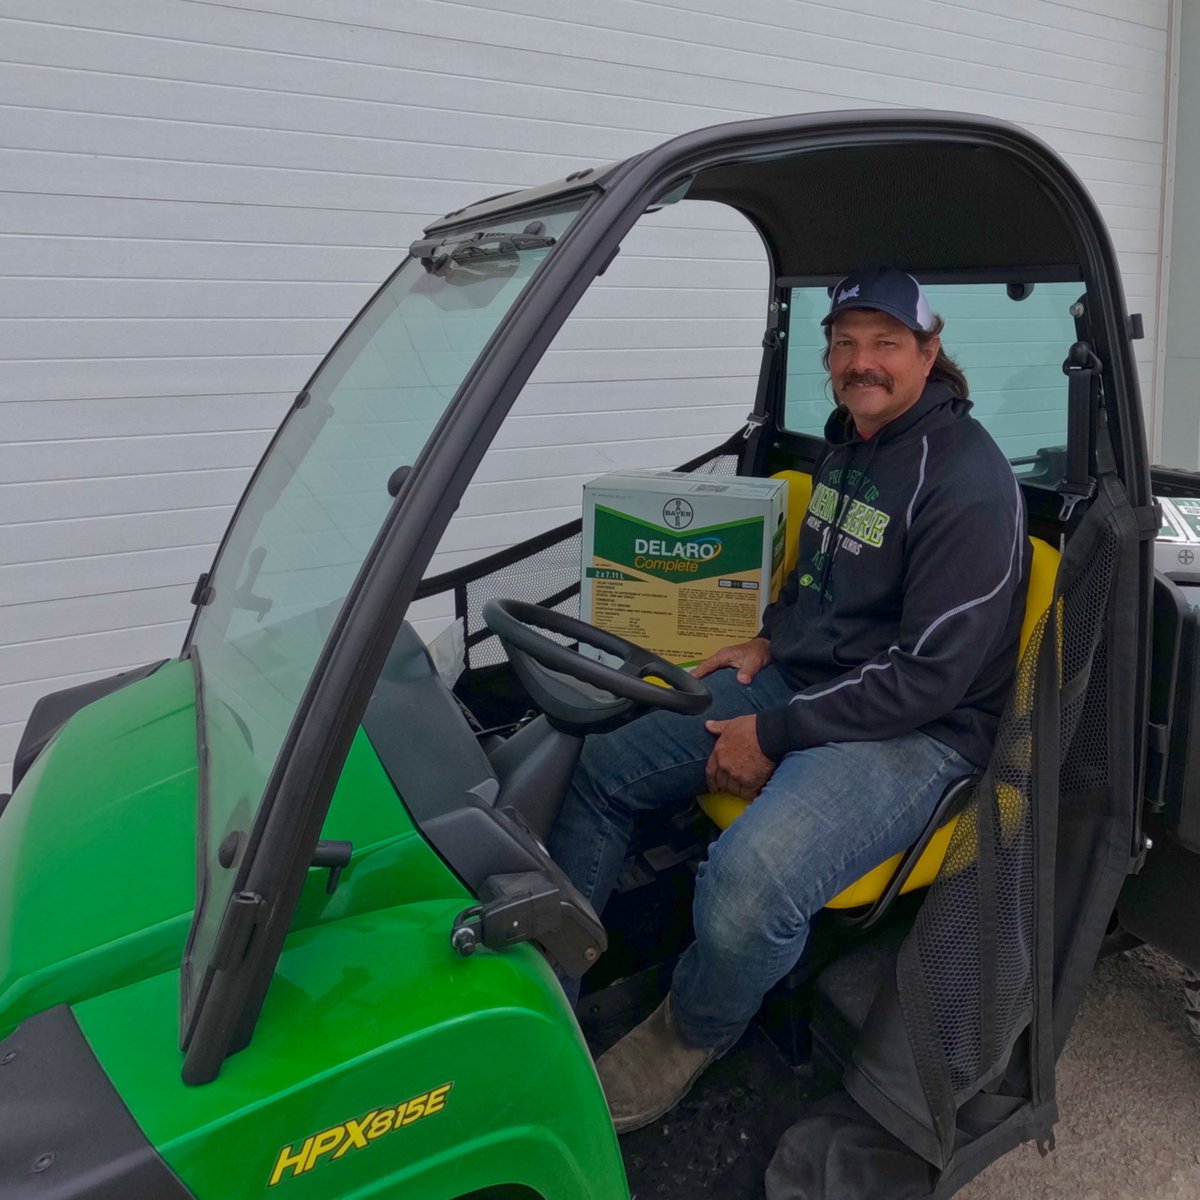 We've got a winner in #EastCdnAg for the #FungicidesForTheWin contest 🎉

Congratulations to Paul Rushton from Selkirk, ON 👏 

Paul received a new 2022 John Deere gator and 320 acres of Bayer fungicides just in time for the growing season​ #ItsGrowTime 🌱